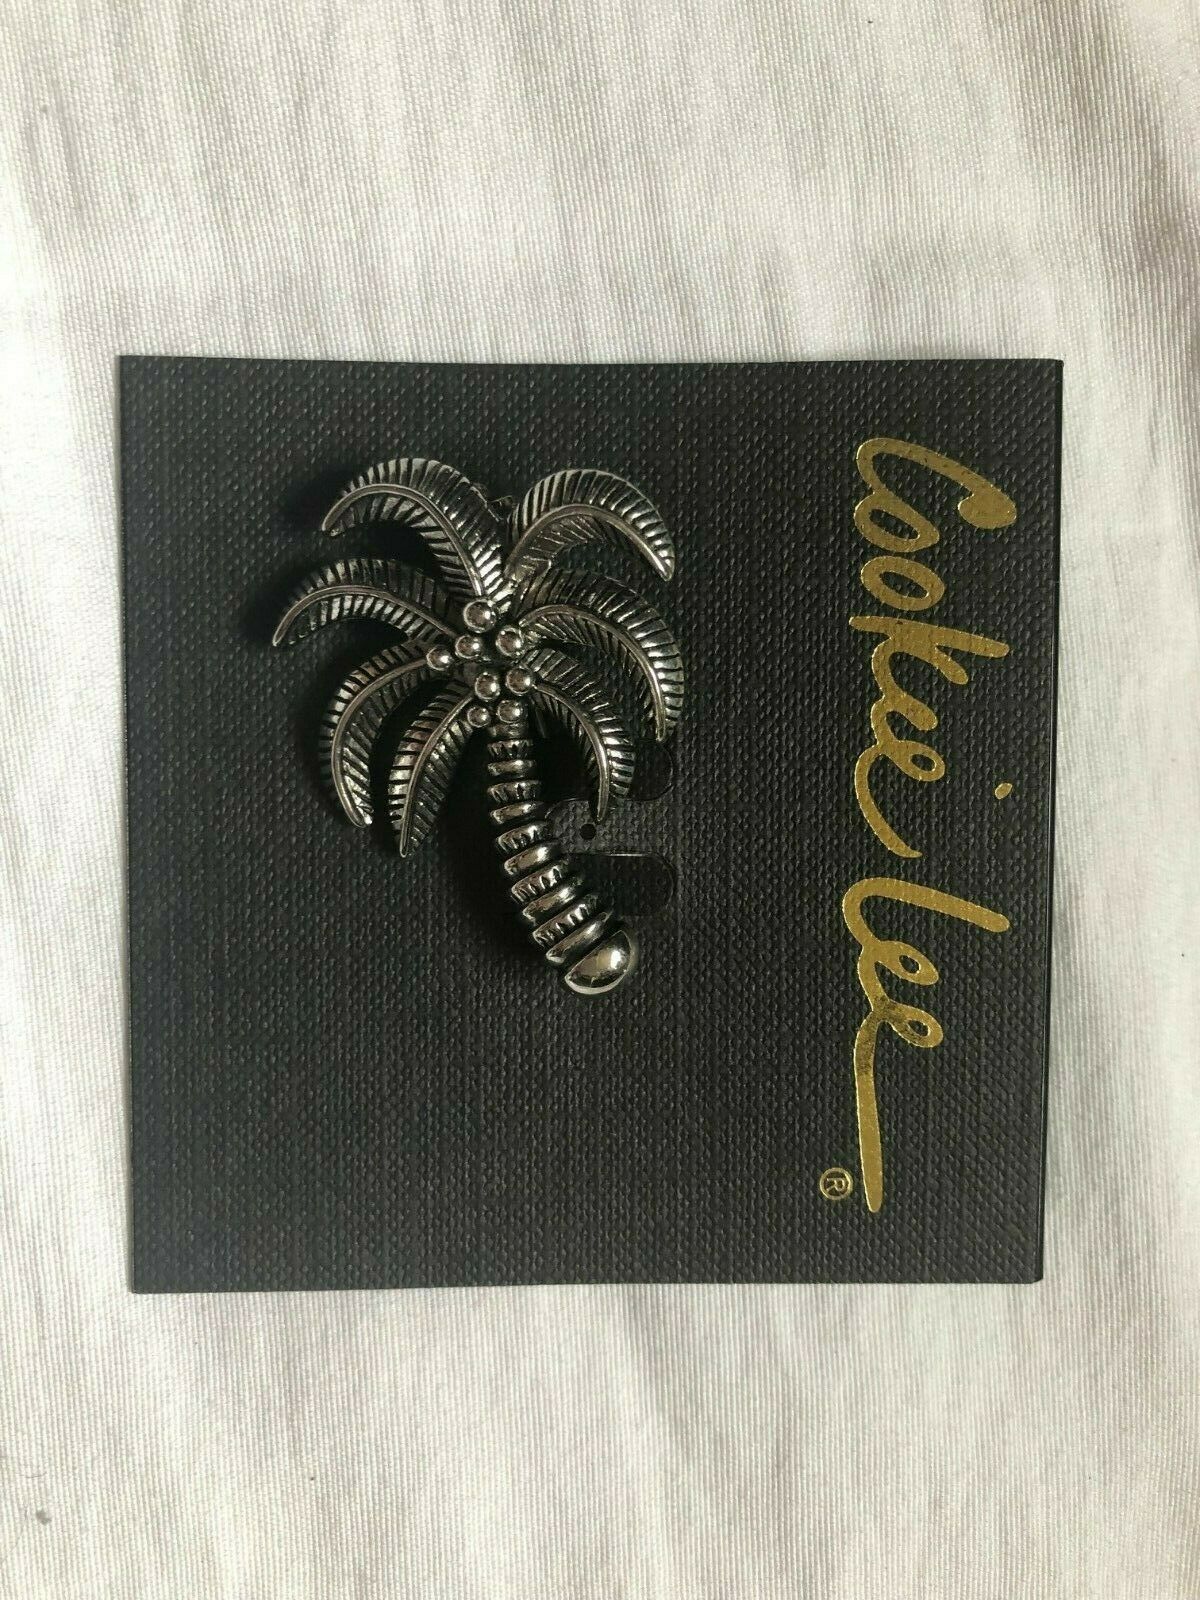 Cookie Lee Silver Colored Palm Tree Pin NWT - $7.00